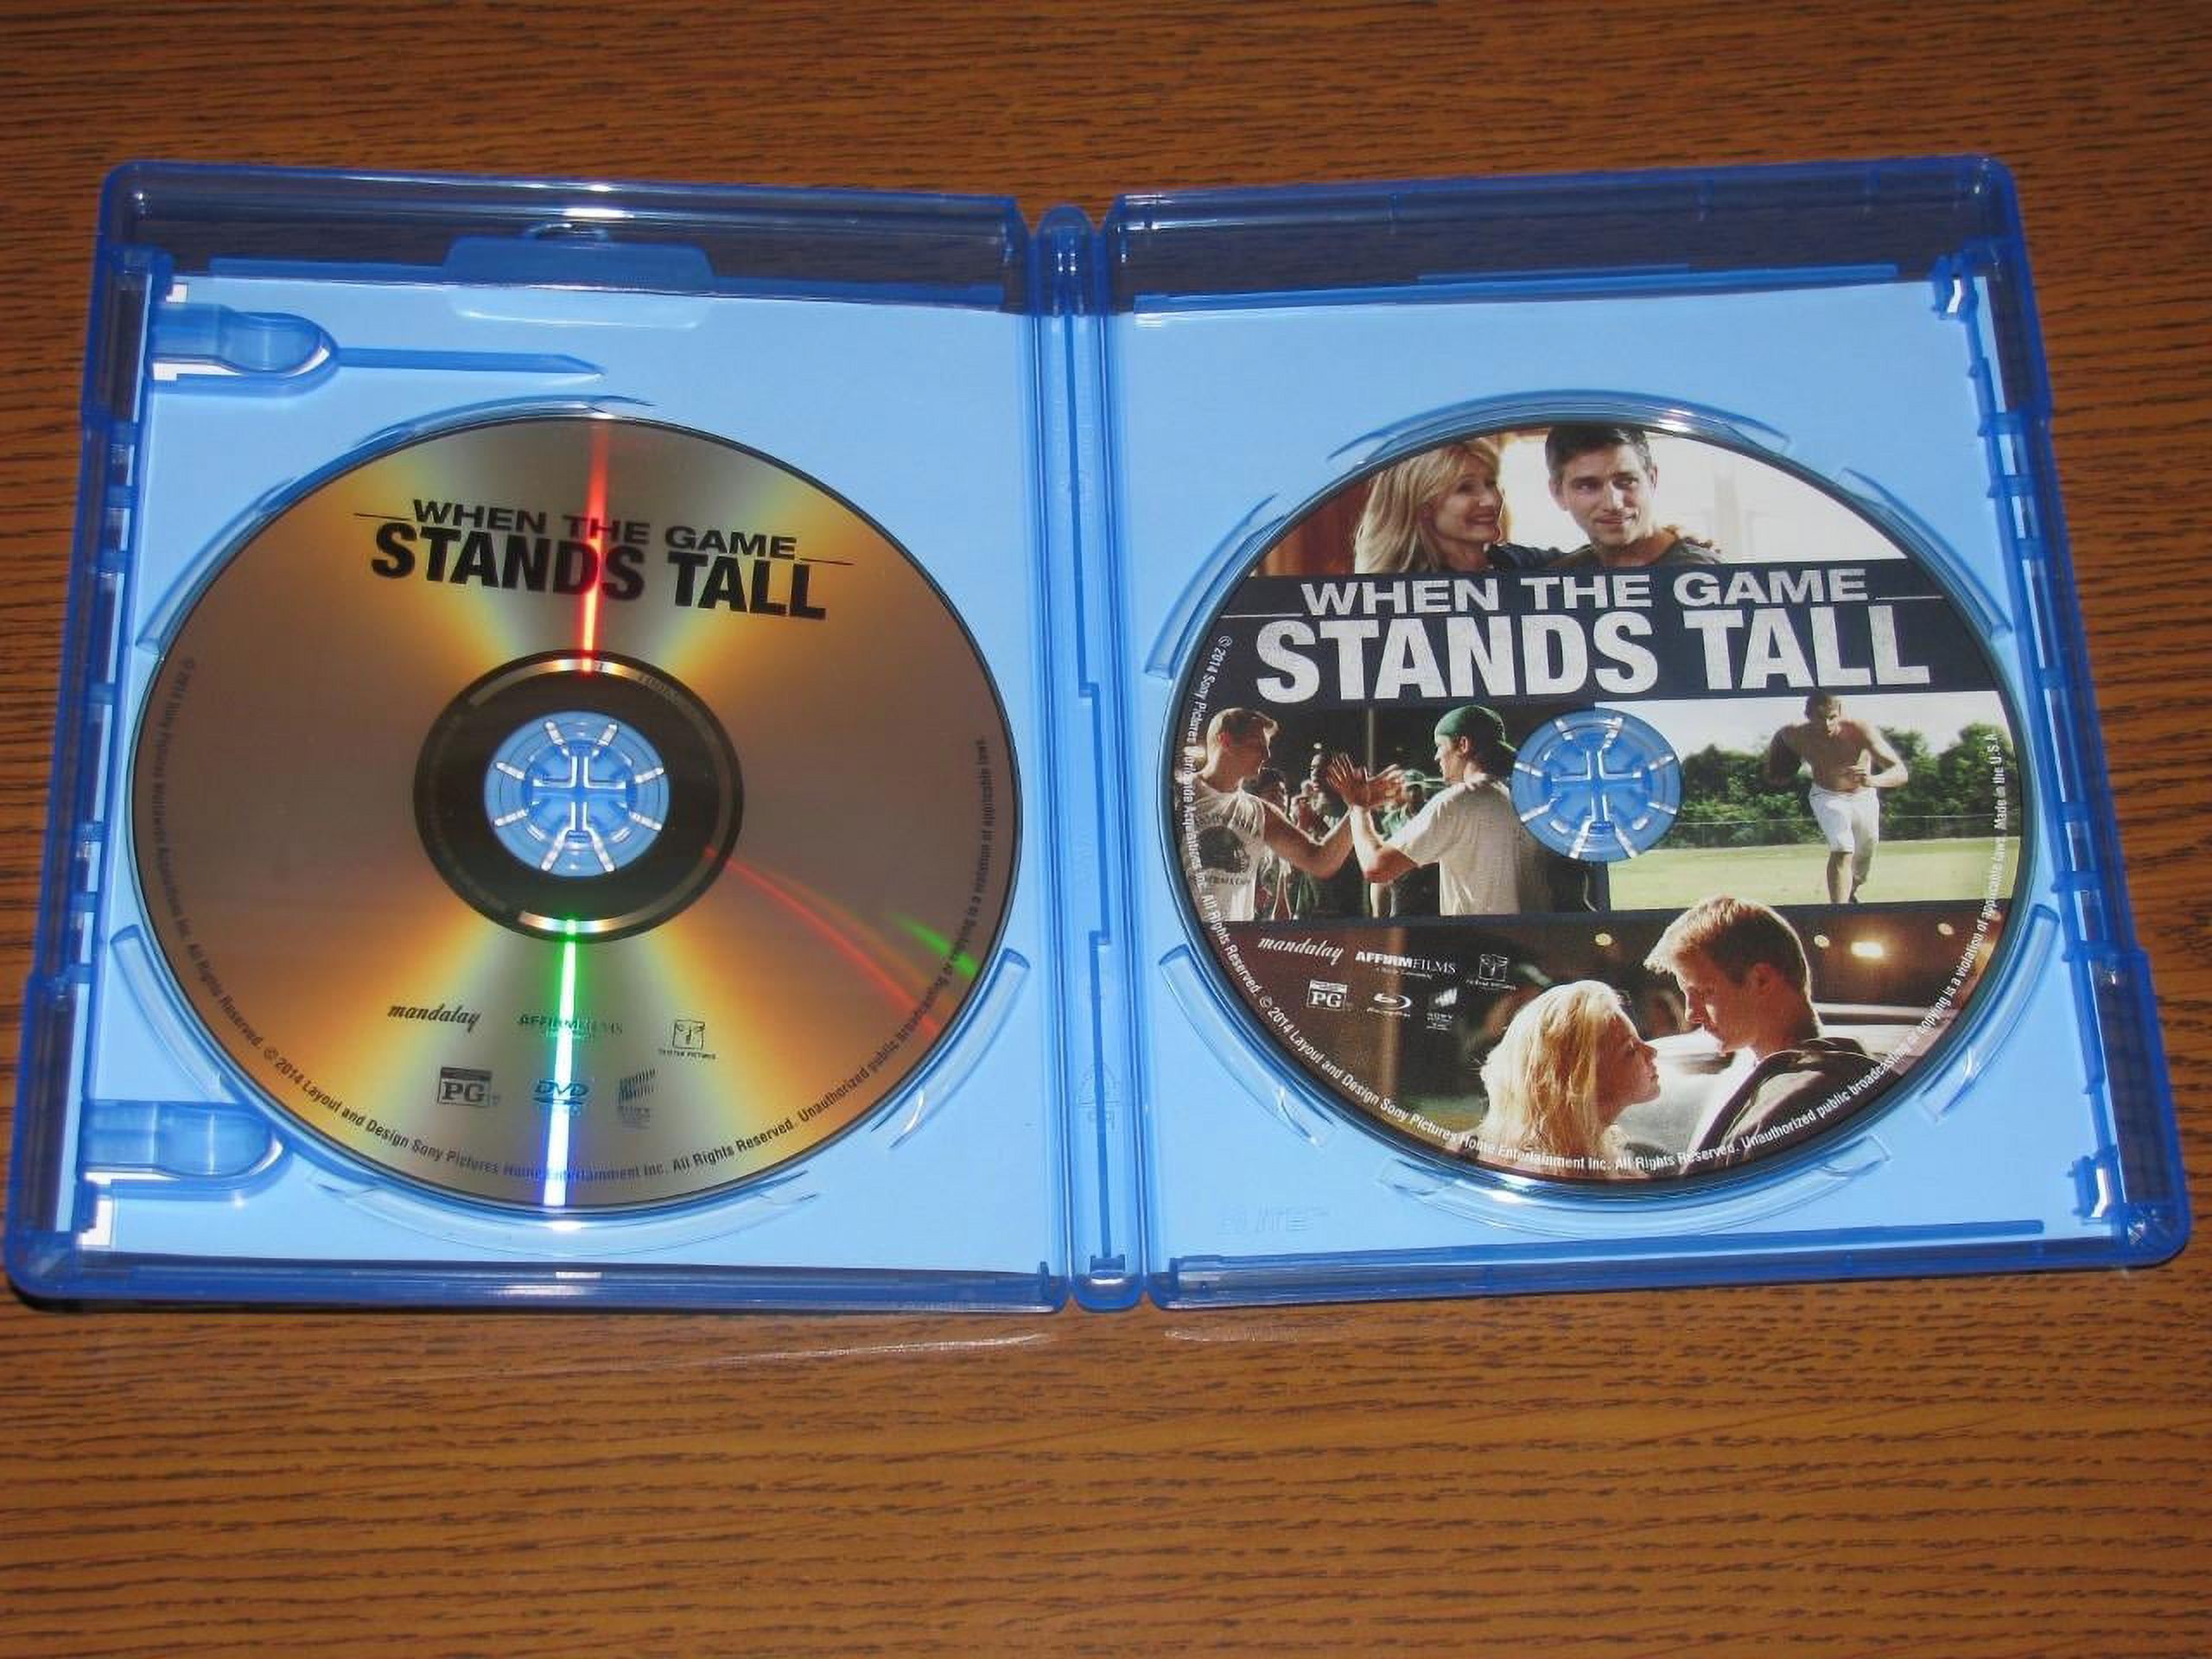 When the Game Stands Tall (Blu-ray + DVD) - image 2 of 3